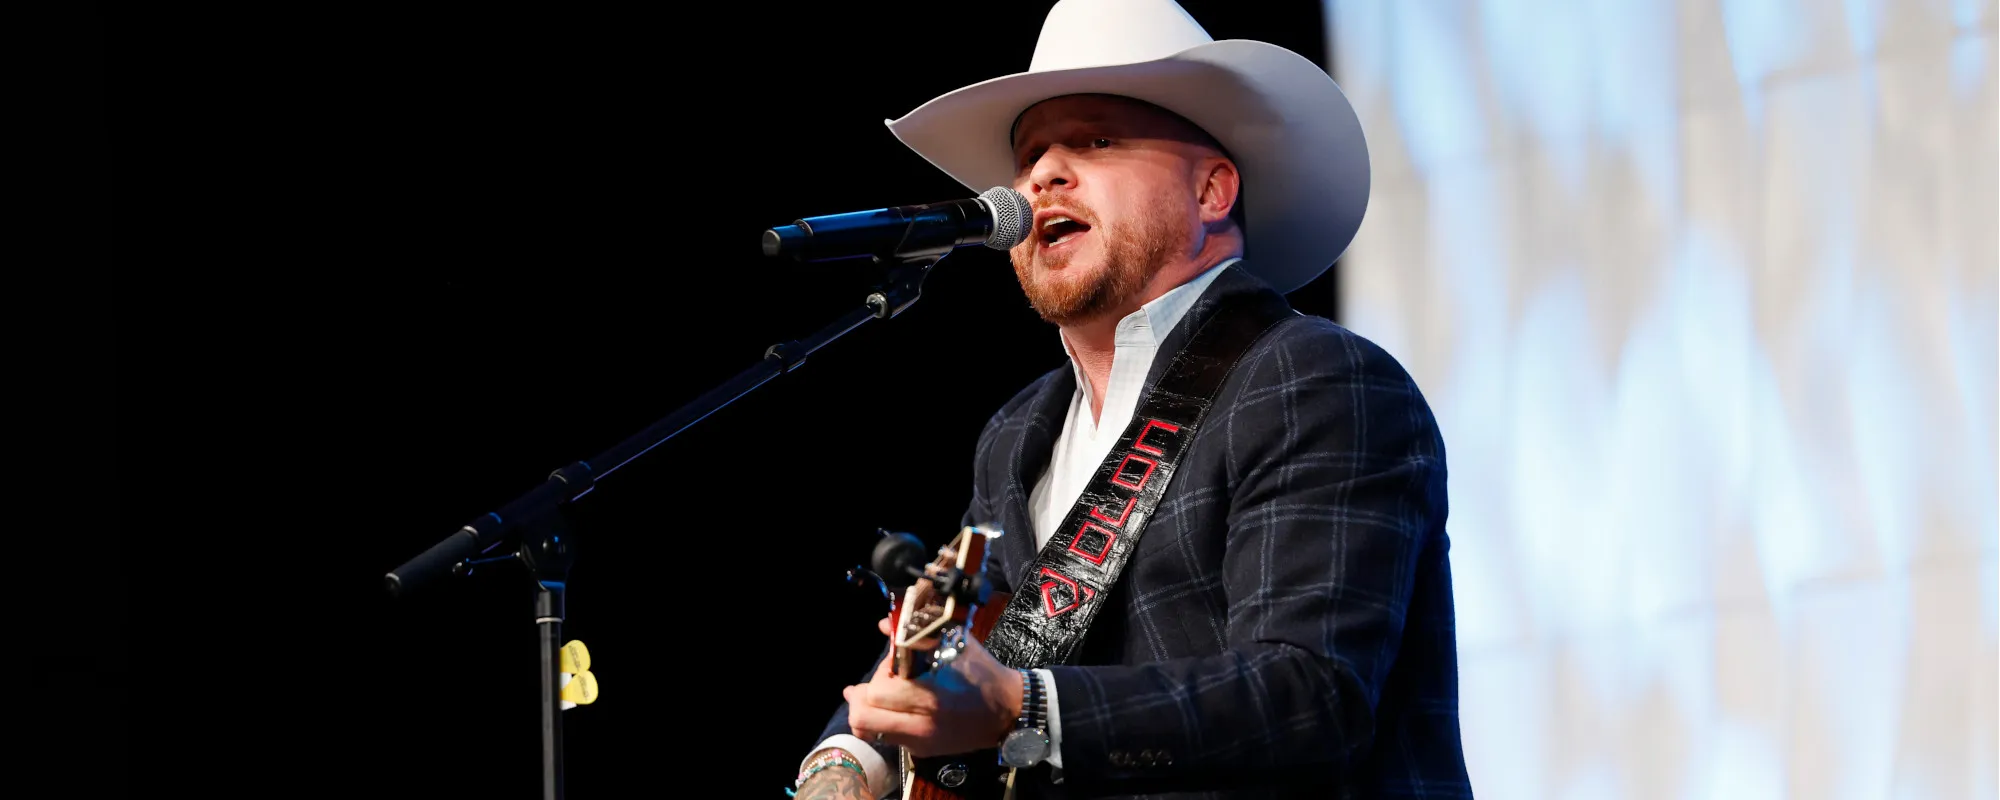 Cody Johnson Reflects on Singing at Grand Ole Opry: “This Was the Town I Was Told I Would Never Make It In”